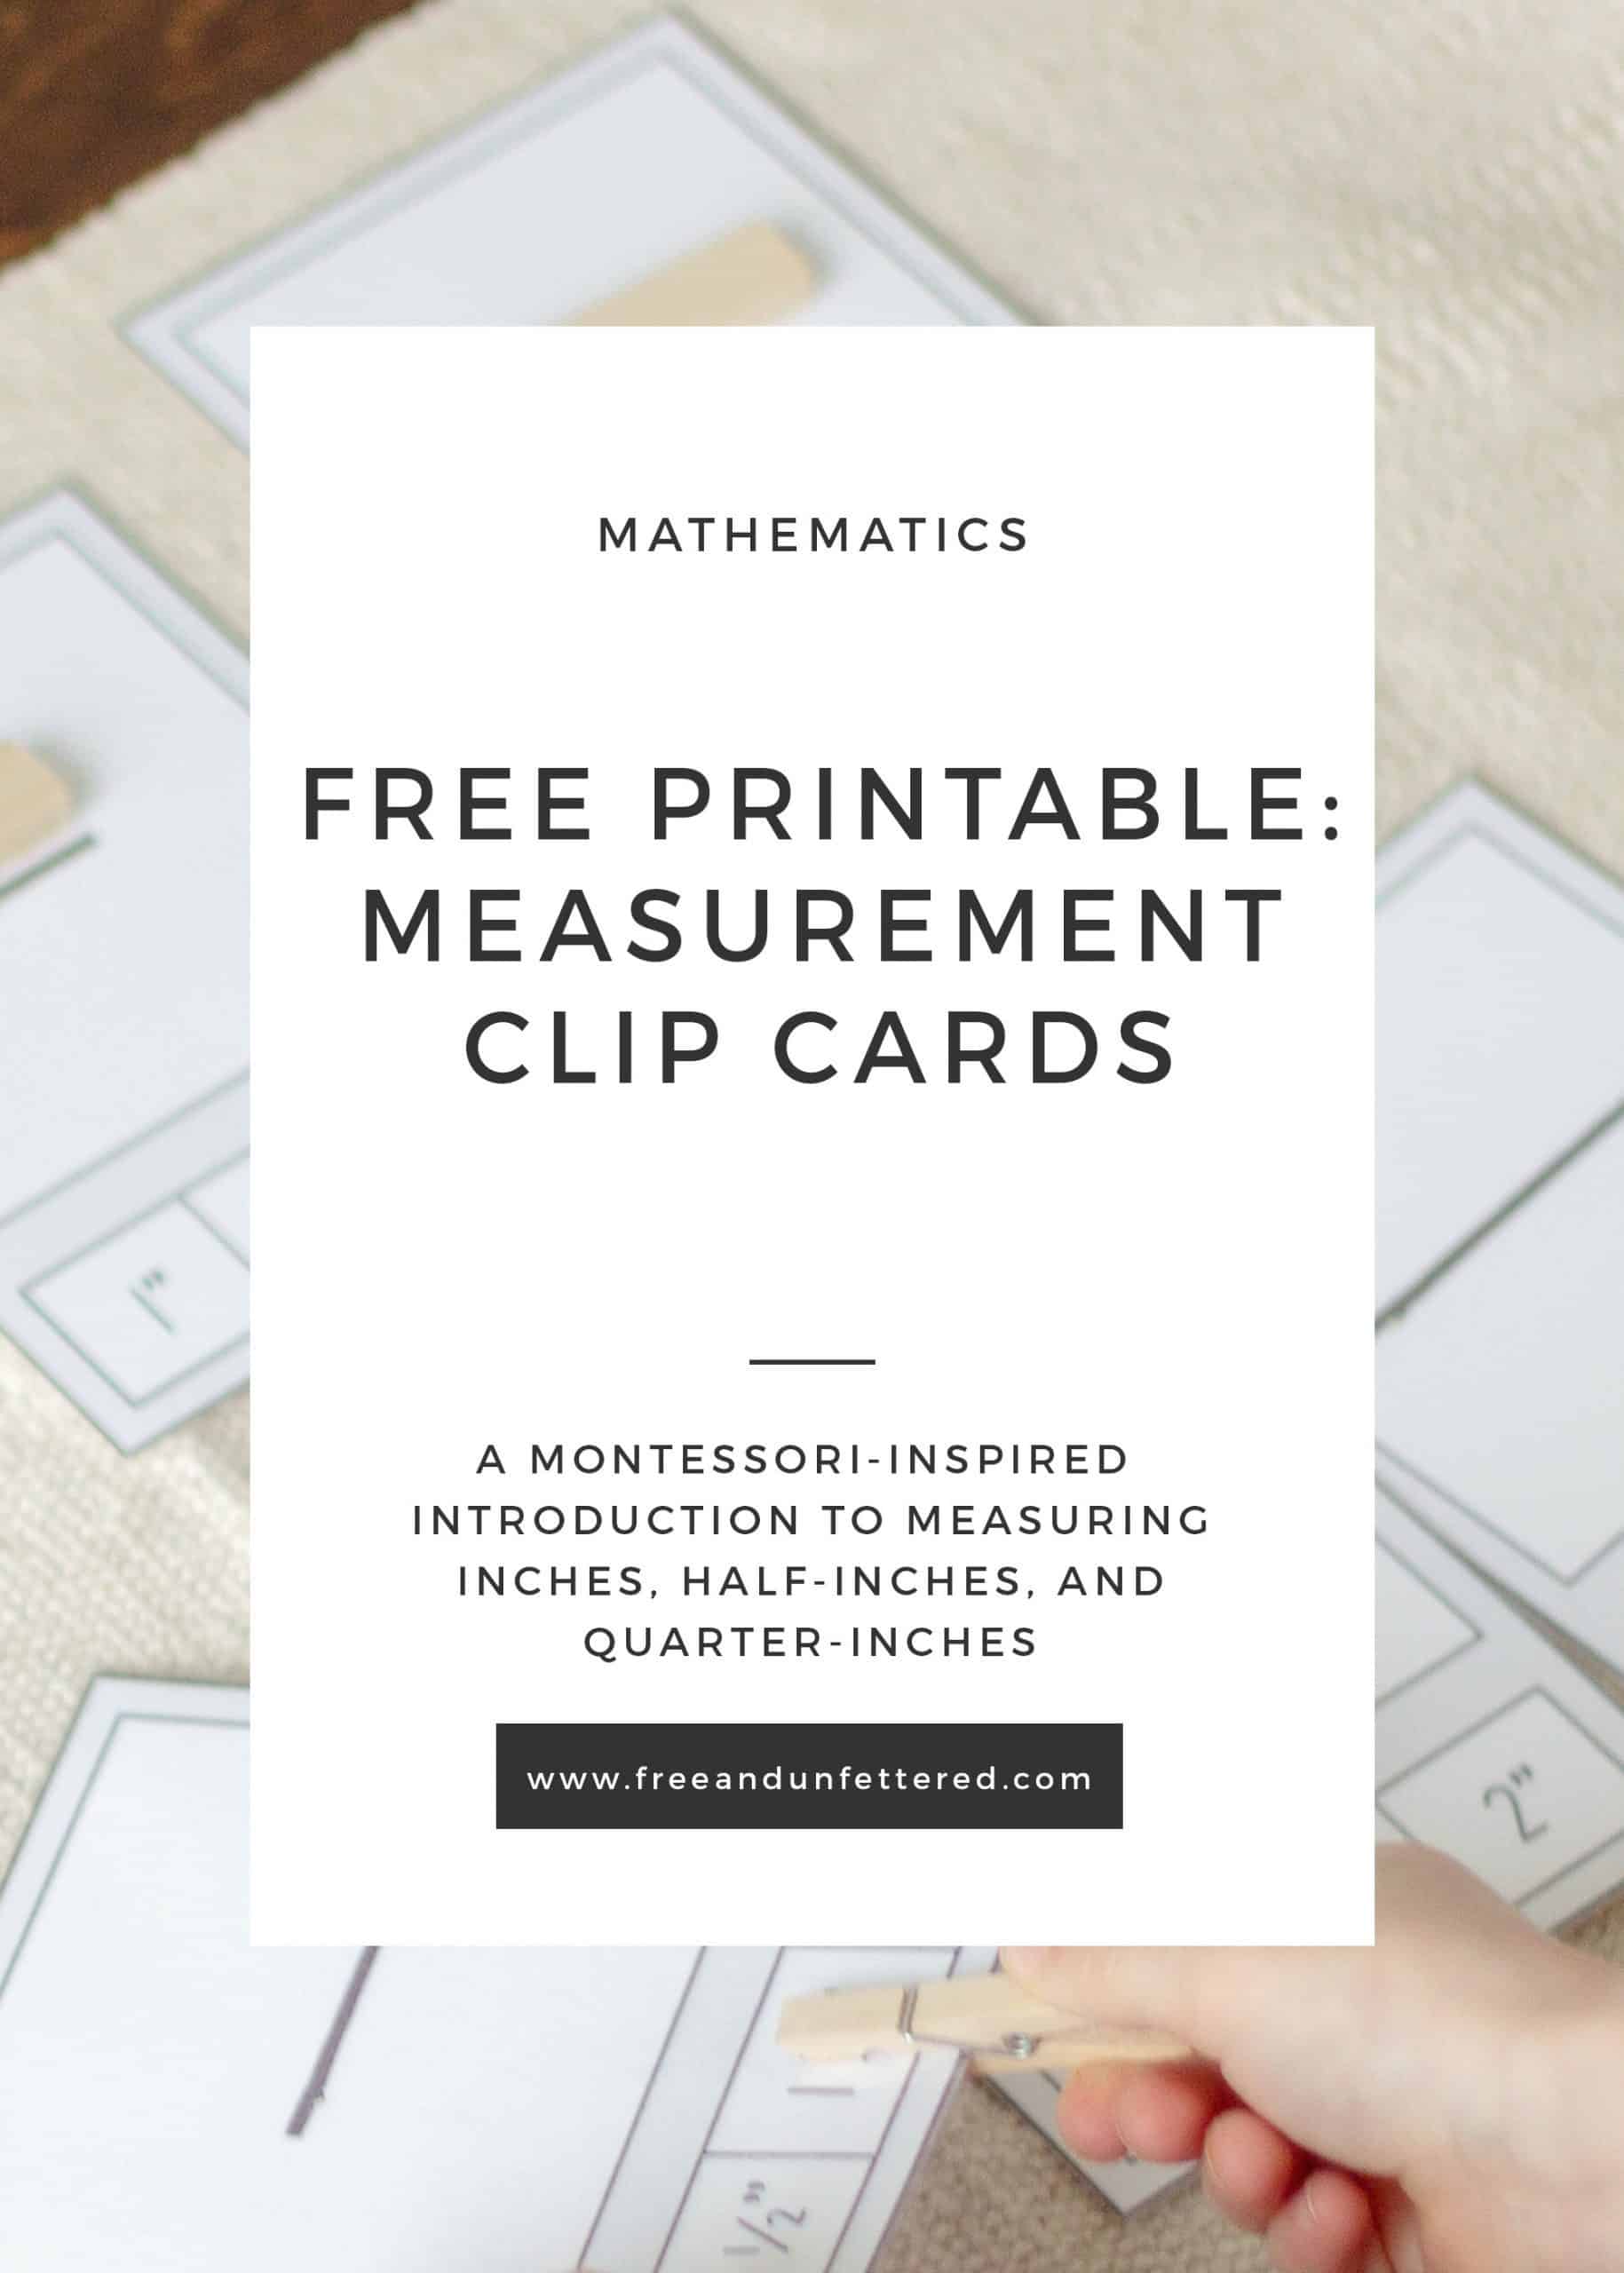 Free Printable: Measurement Clip Cards for Kids